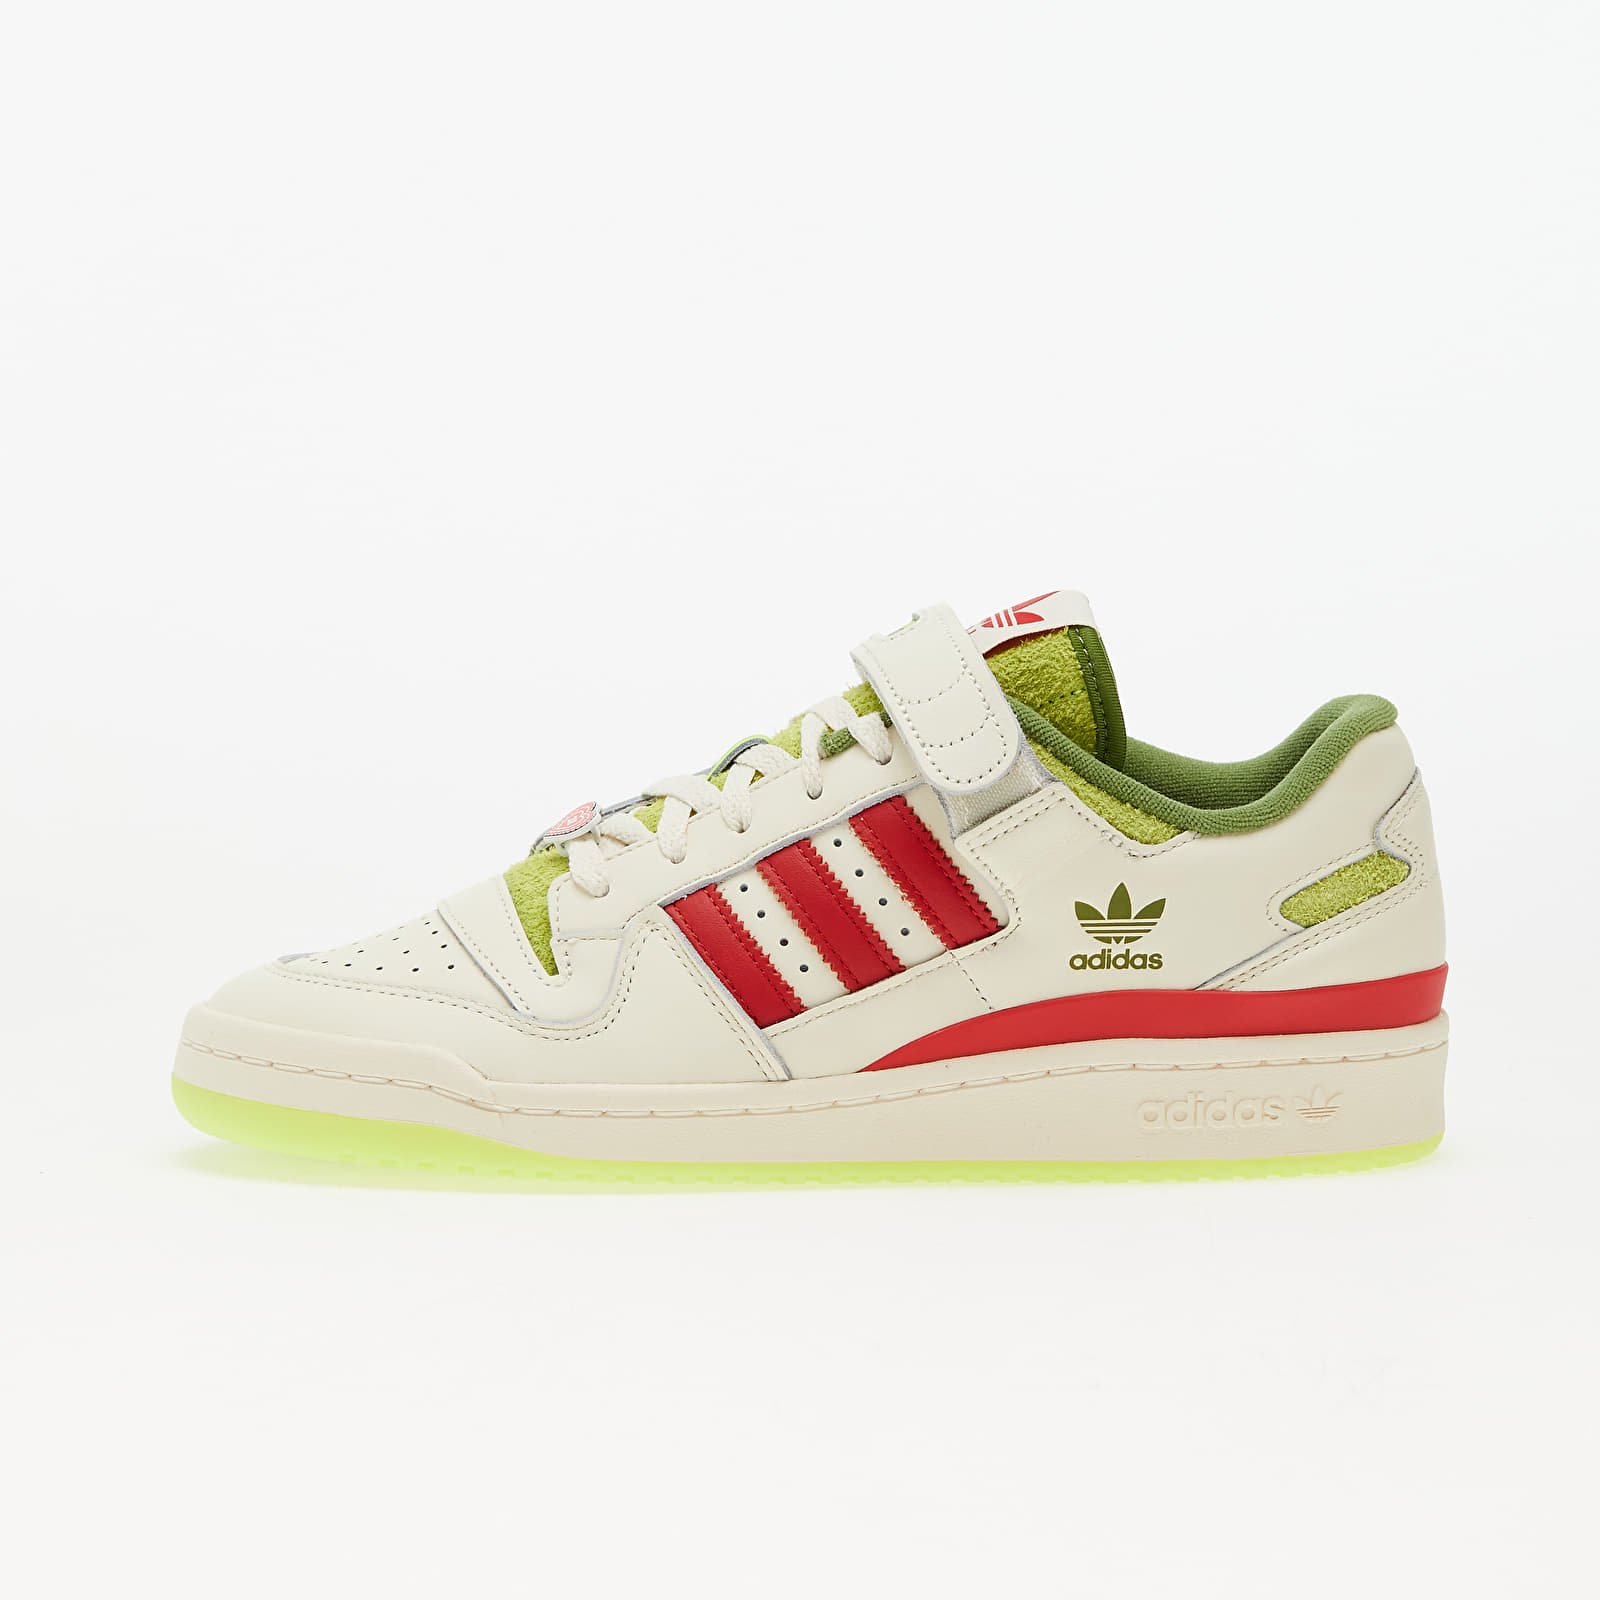 Pánske tenisky a topánky adidas x The Grinch Forum Low Core White/ Collegiate Red/ Solar Slime